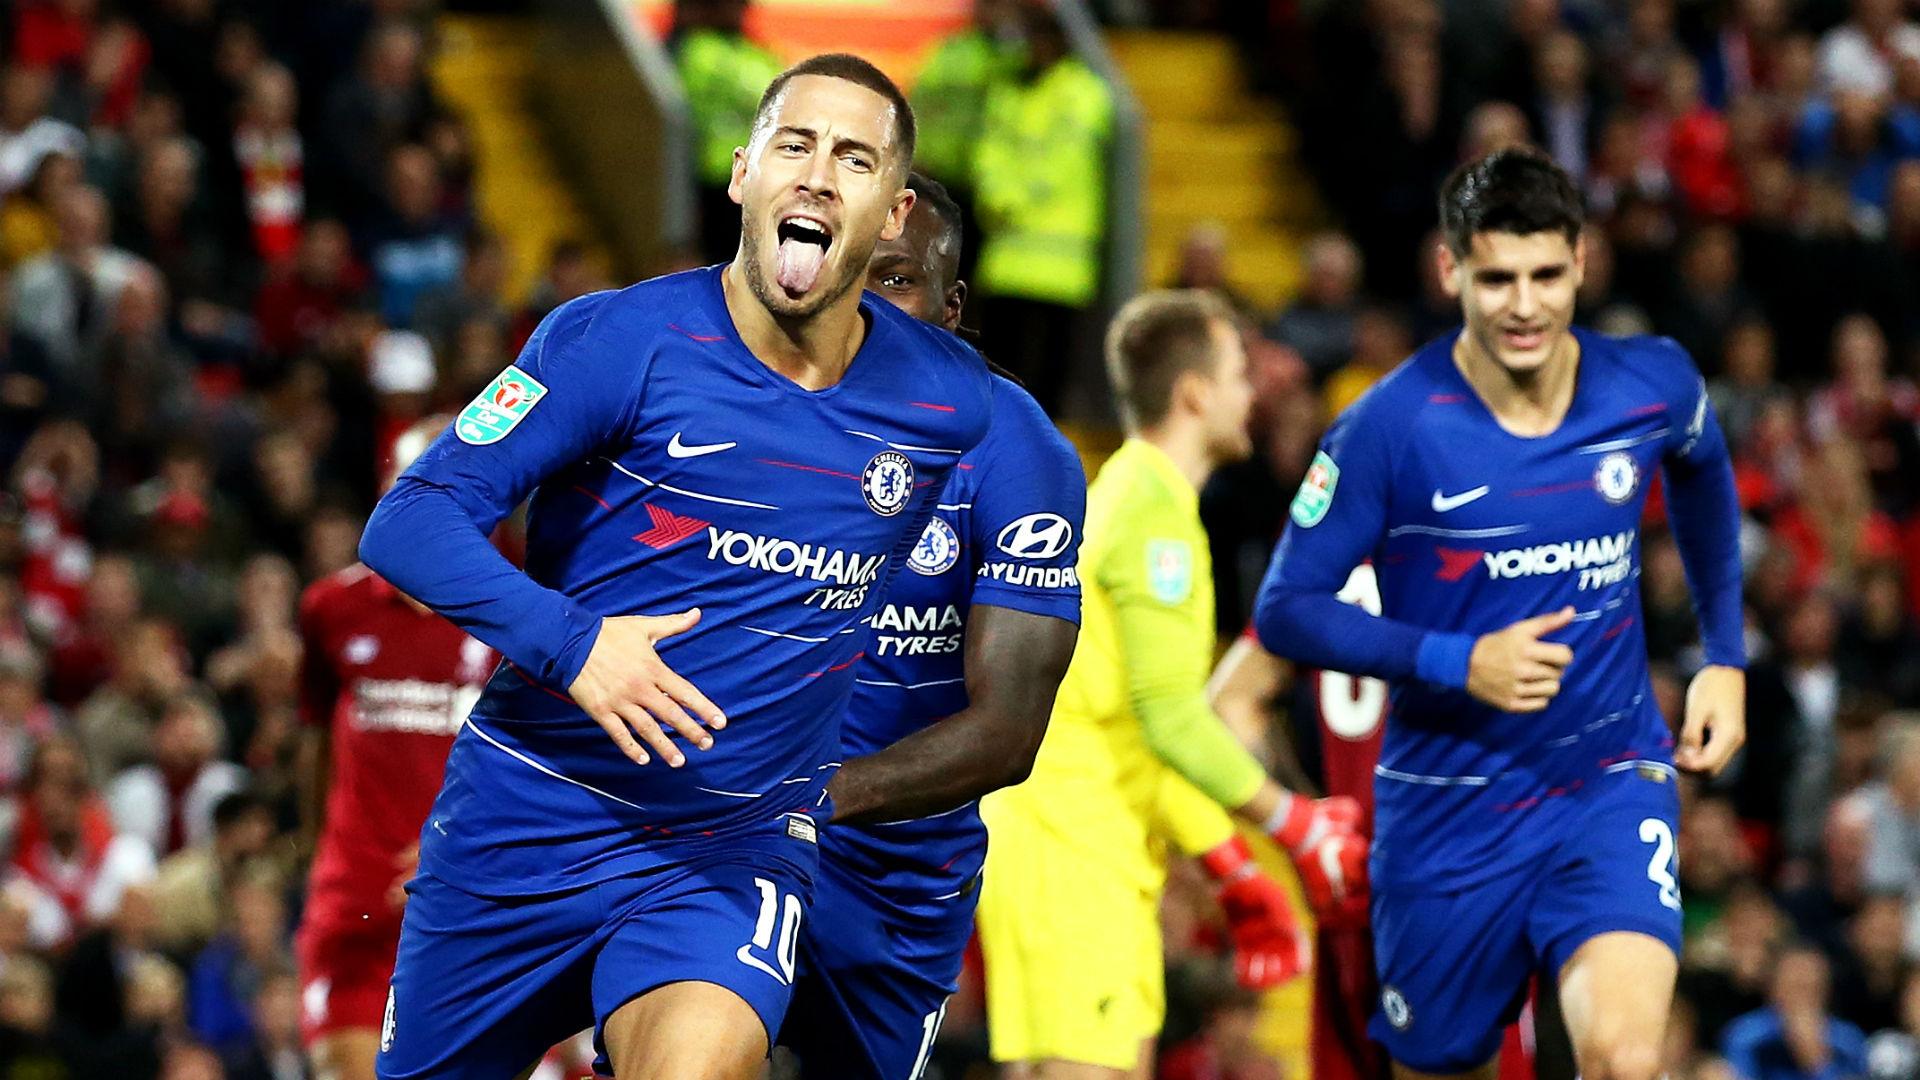 Chelsea news: I love Anfield! Hazard gushes over 'epic